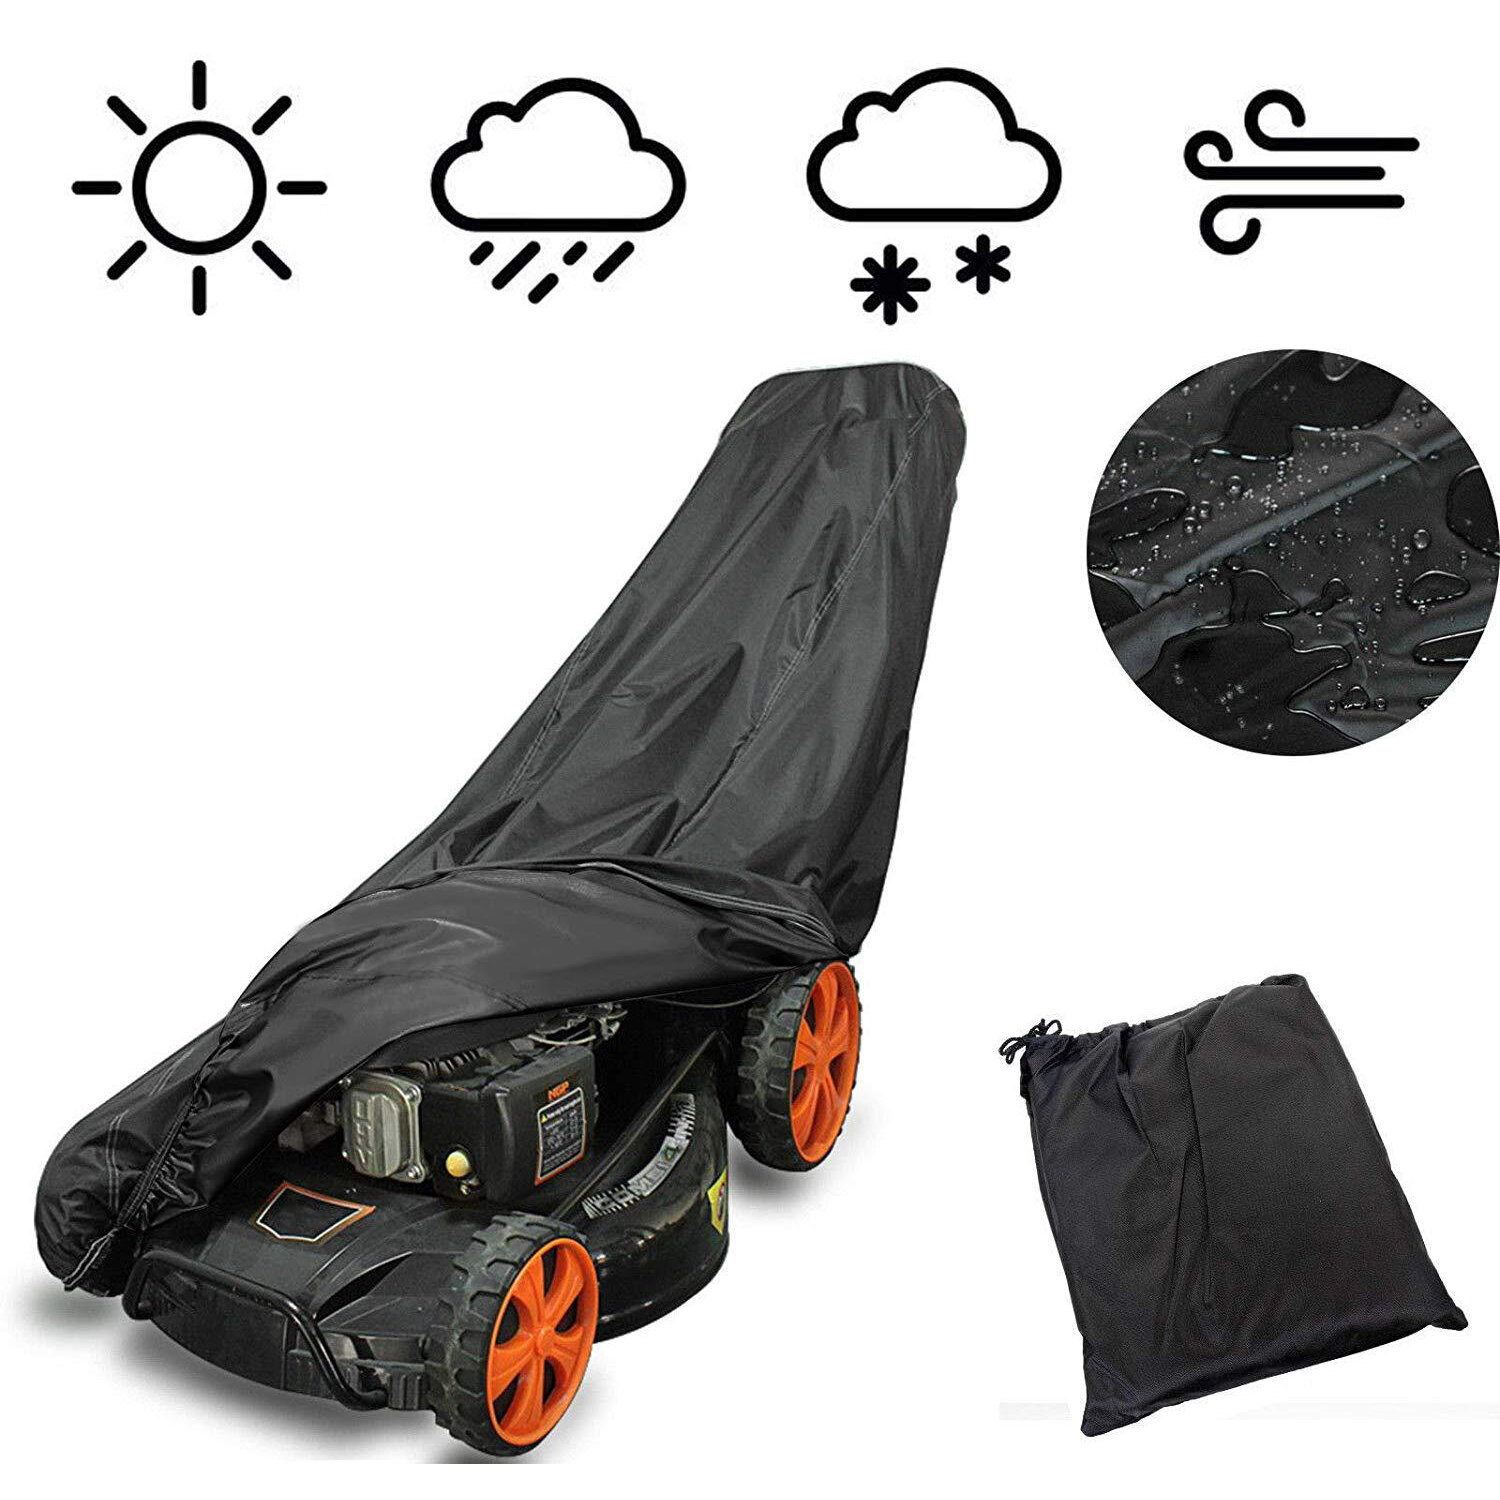 74inch Waterproof Mower Cover Garden Rain Dust Protector Tear Resistant for Electric Reel Push Mowers with Storage Bag